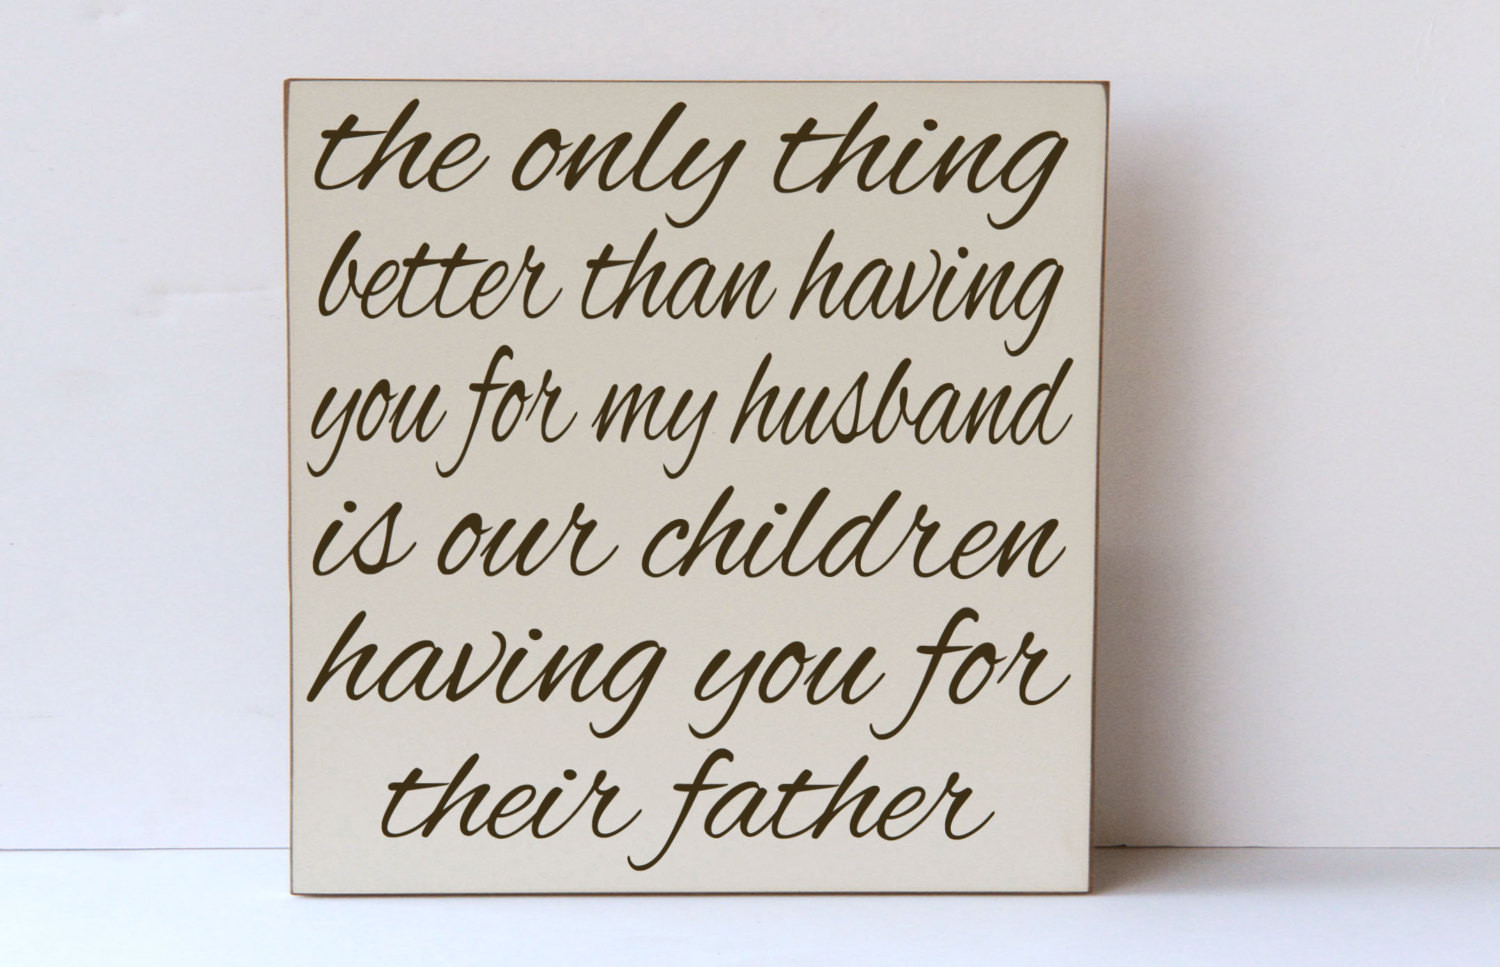 Fathers Day Quotes To Husband
 Fathers Day Quotes For Husband – Quotesta